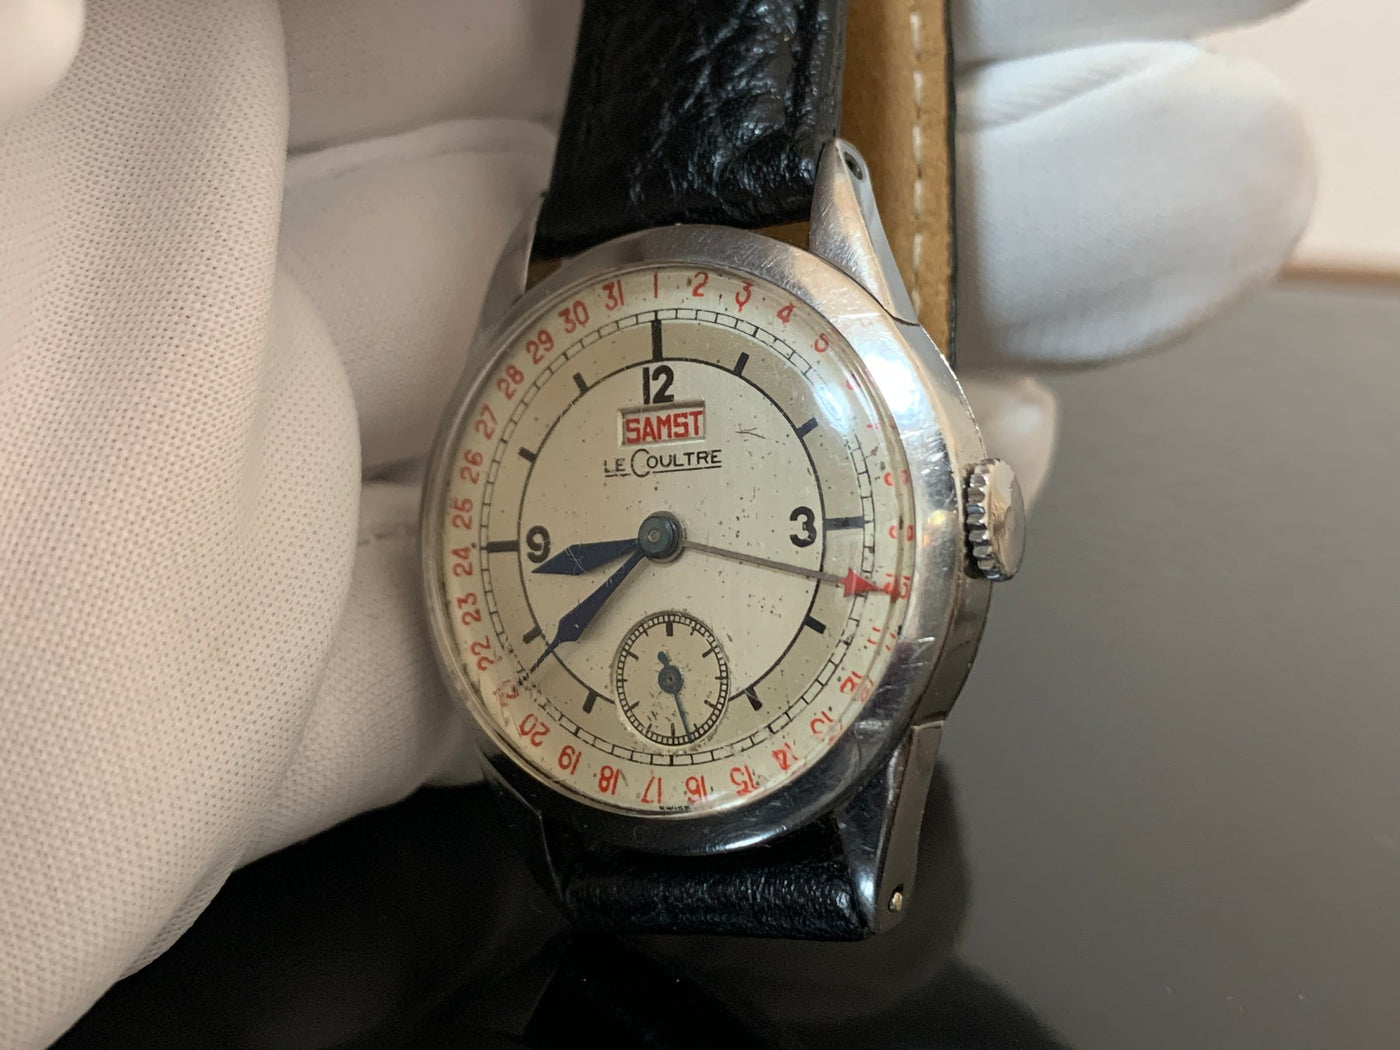 Jaeger-LeCoultre Hand-wound Day Date Sector Dial Watch